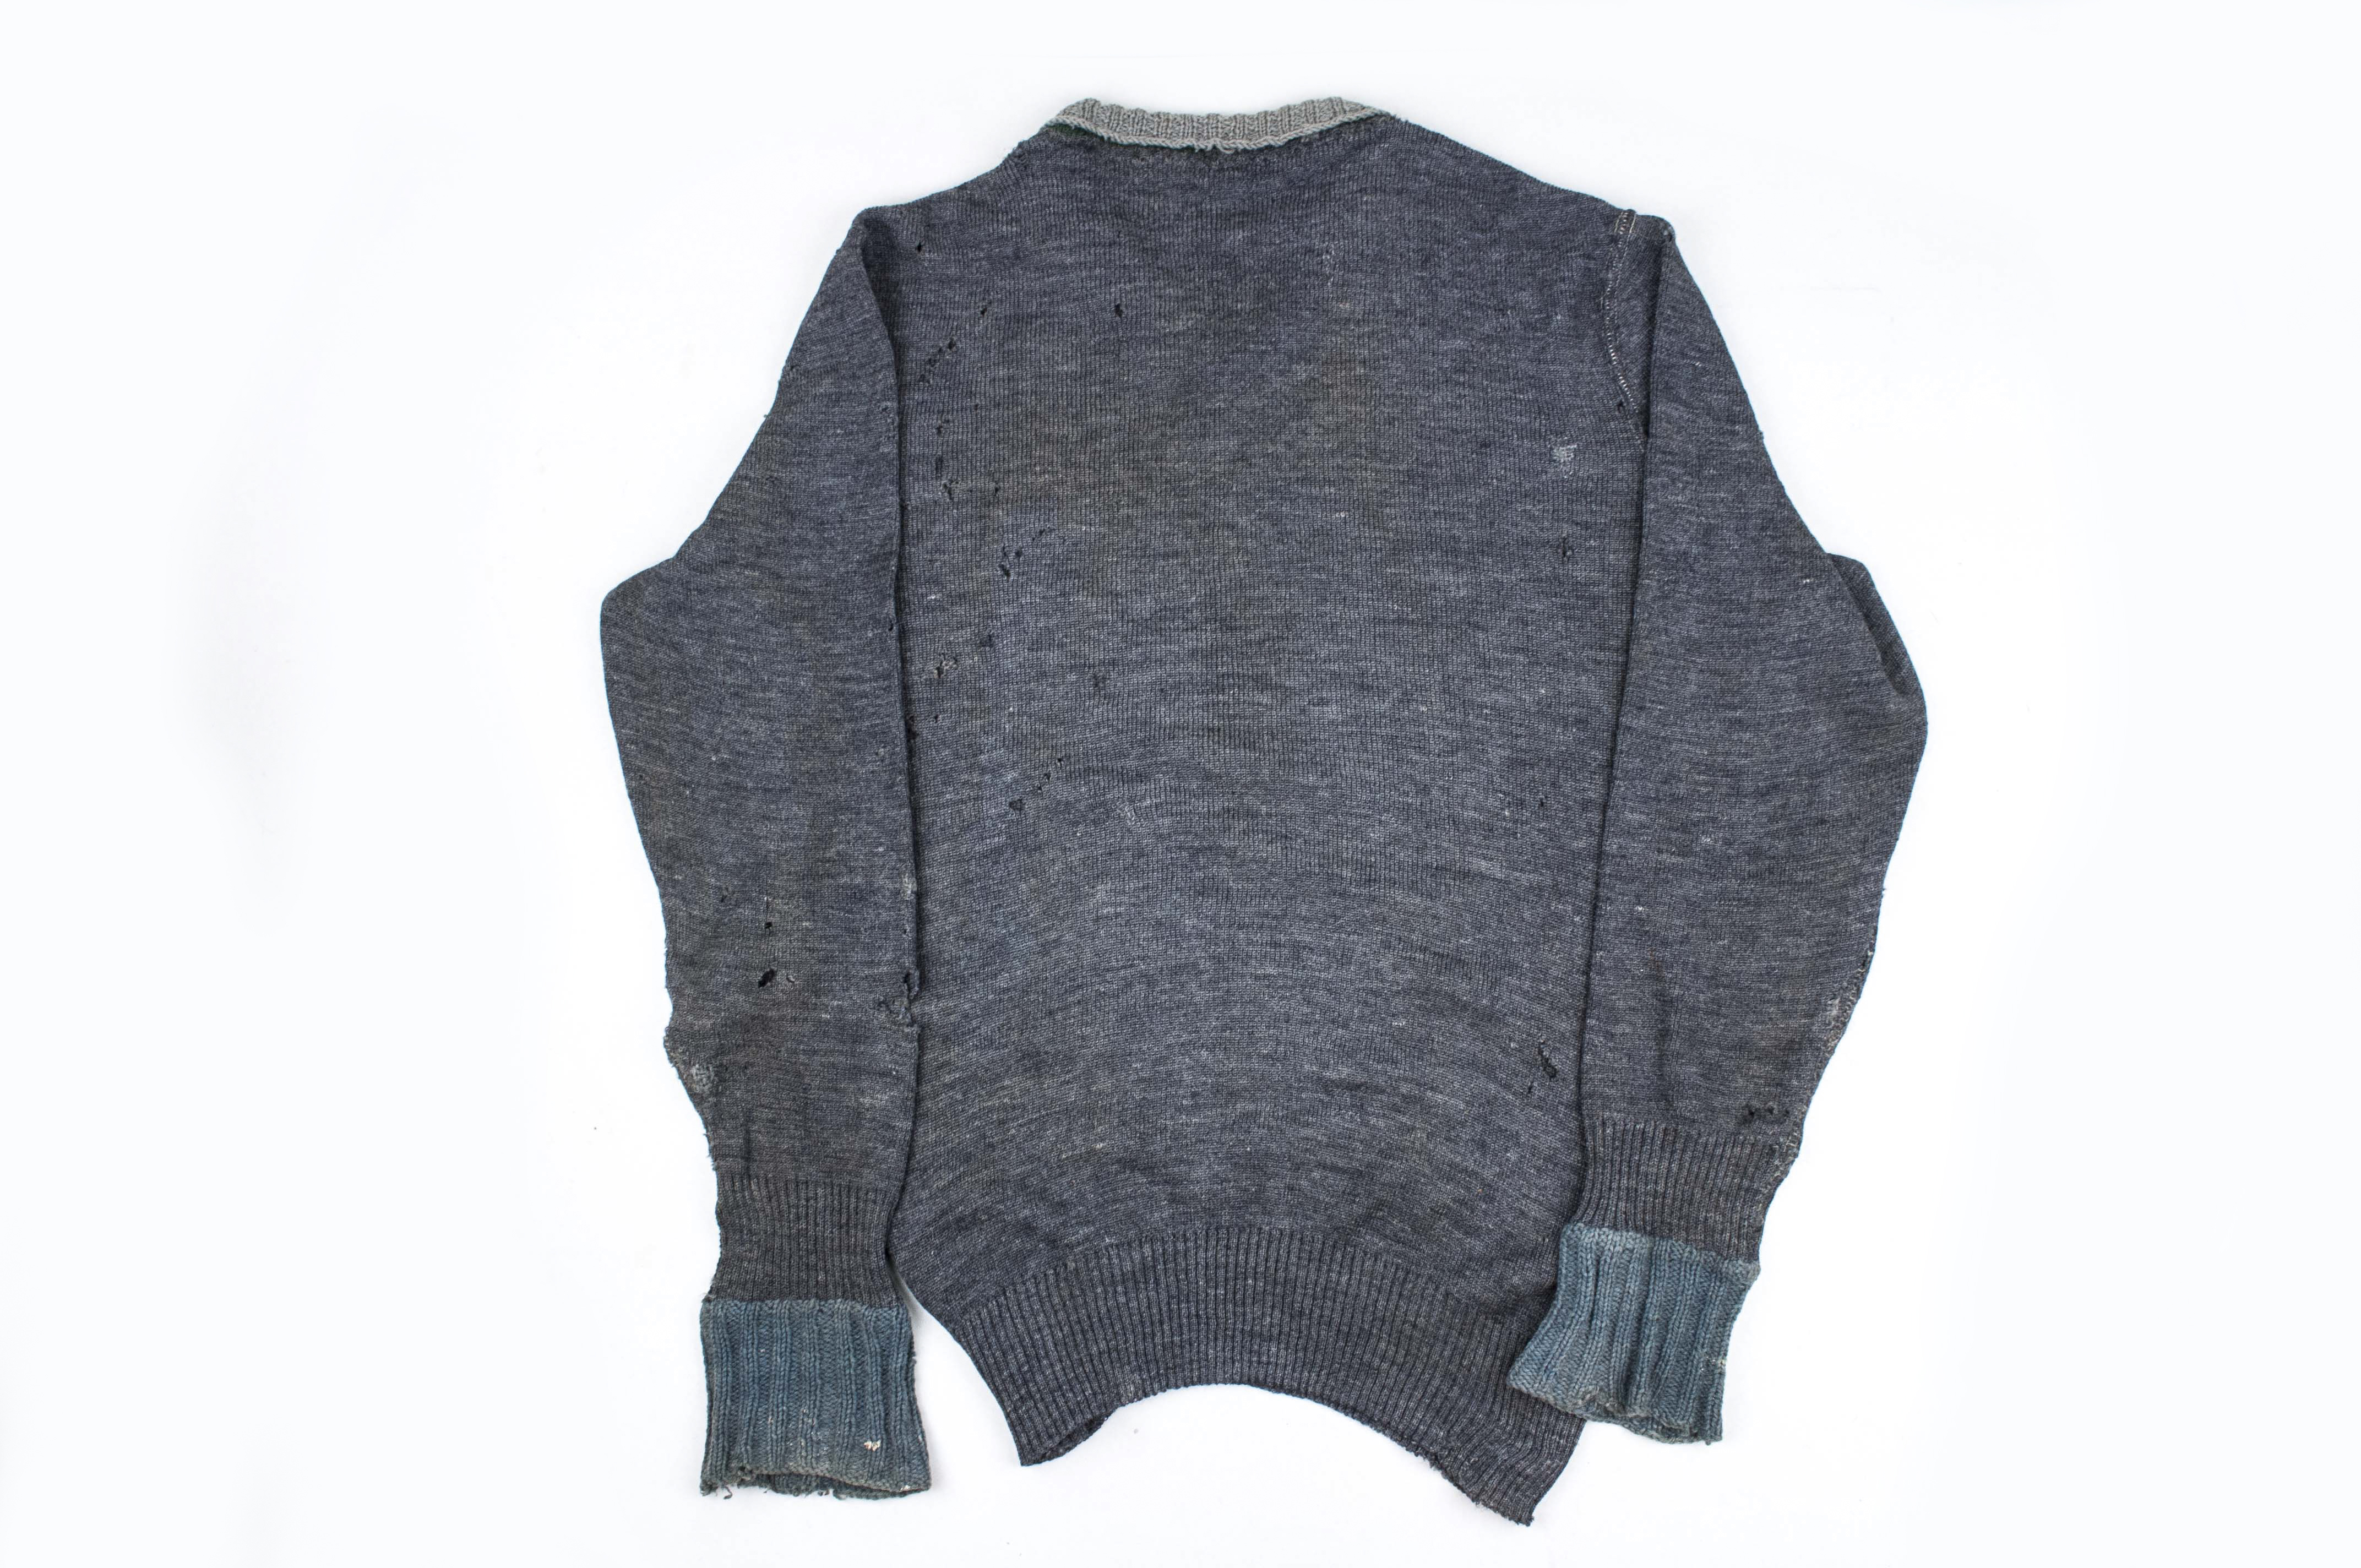 Used condition Wehrmacht issue sweater – fjm44